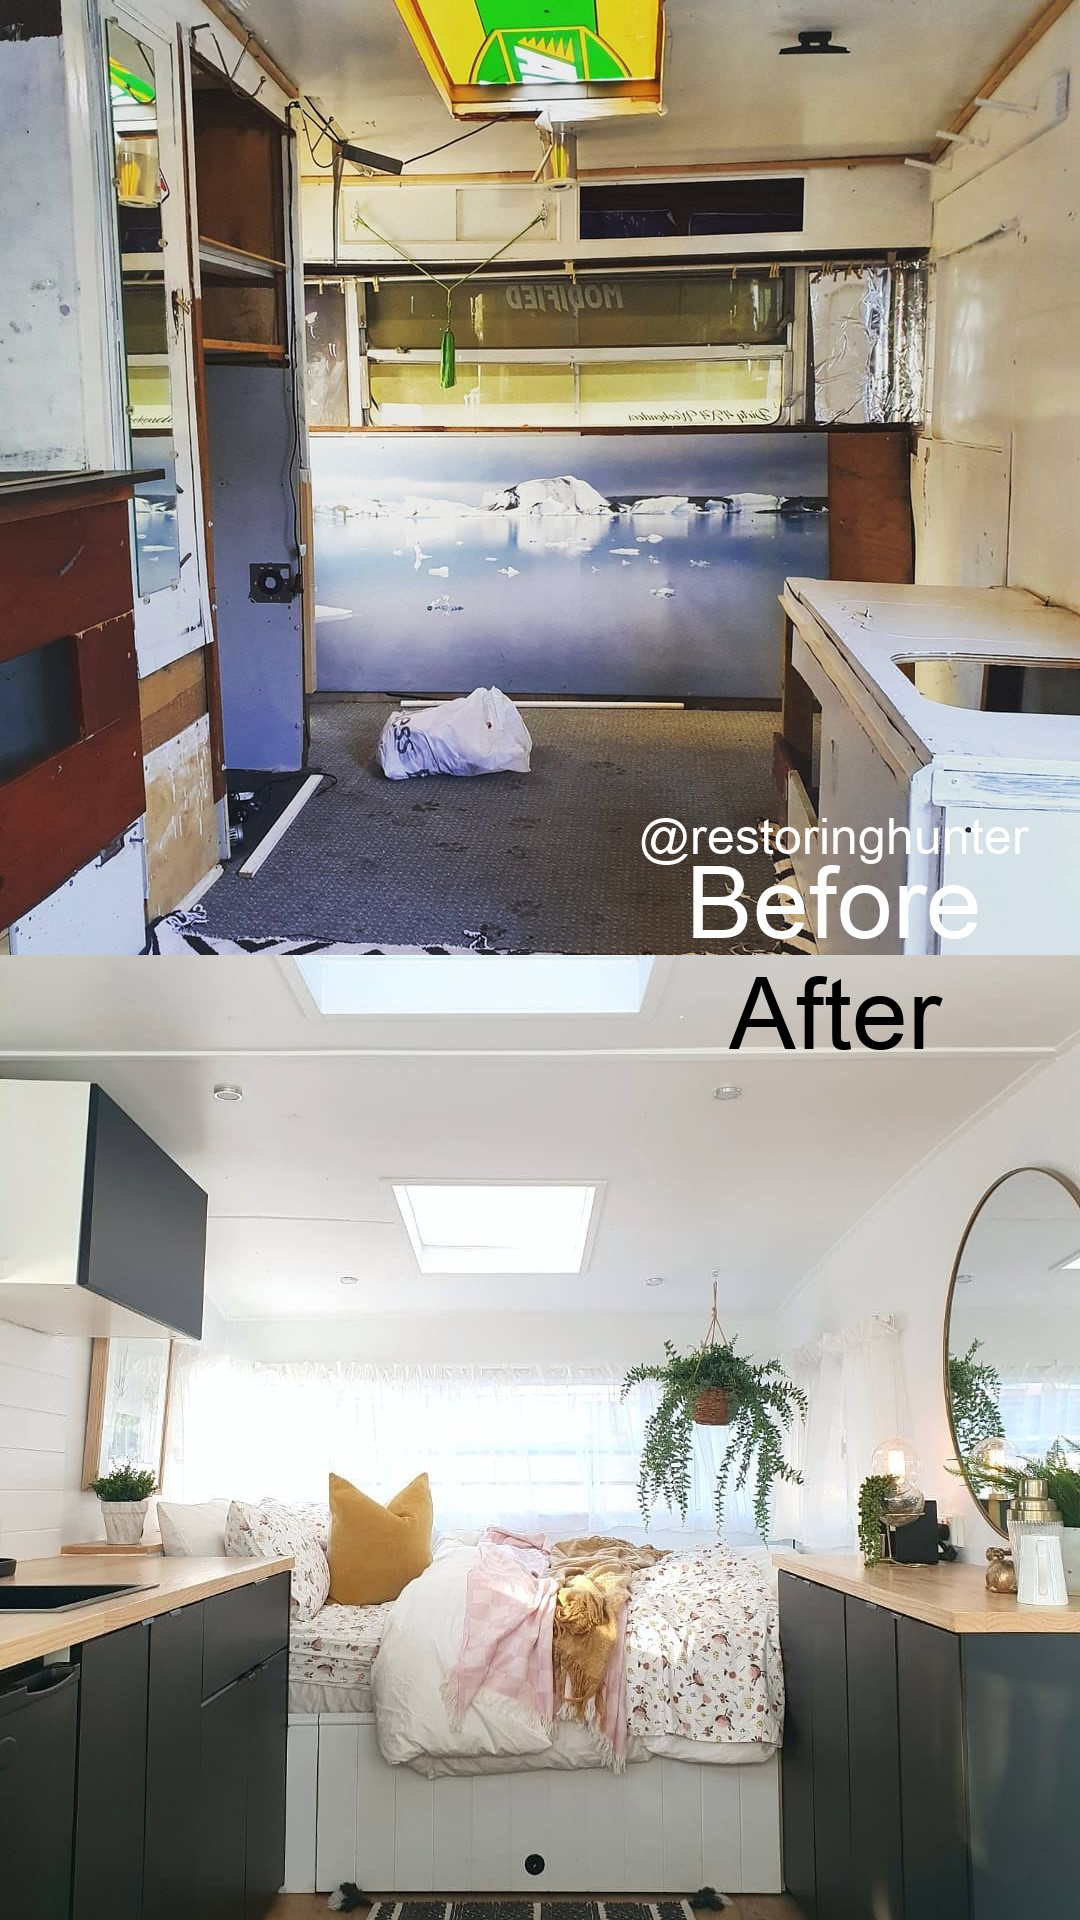 Before and after photos of the interior of a renovated vintage caravan.